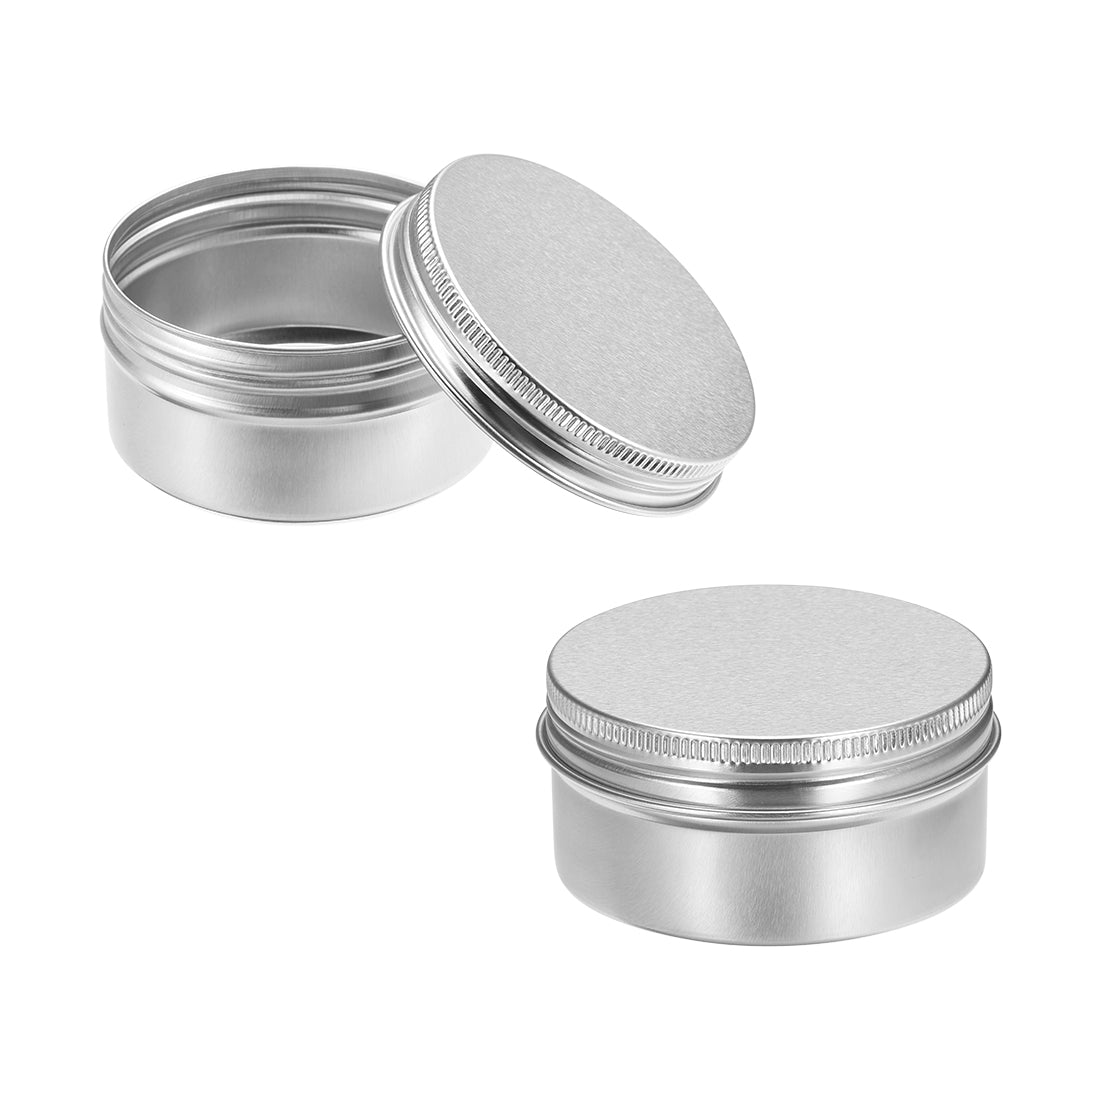 uxcell Uxcell 2.7 oz Round Aluminum Cans Tin Can Screw Top Metal Lid Containers 80ml, 3pcs